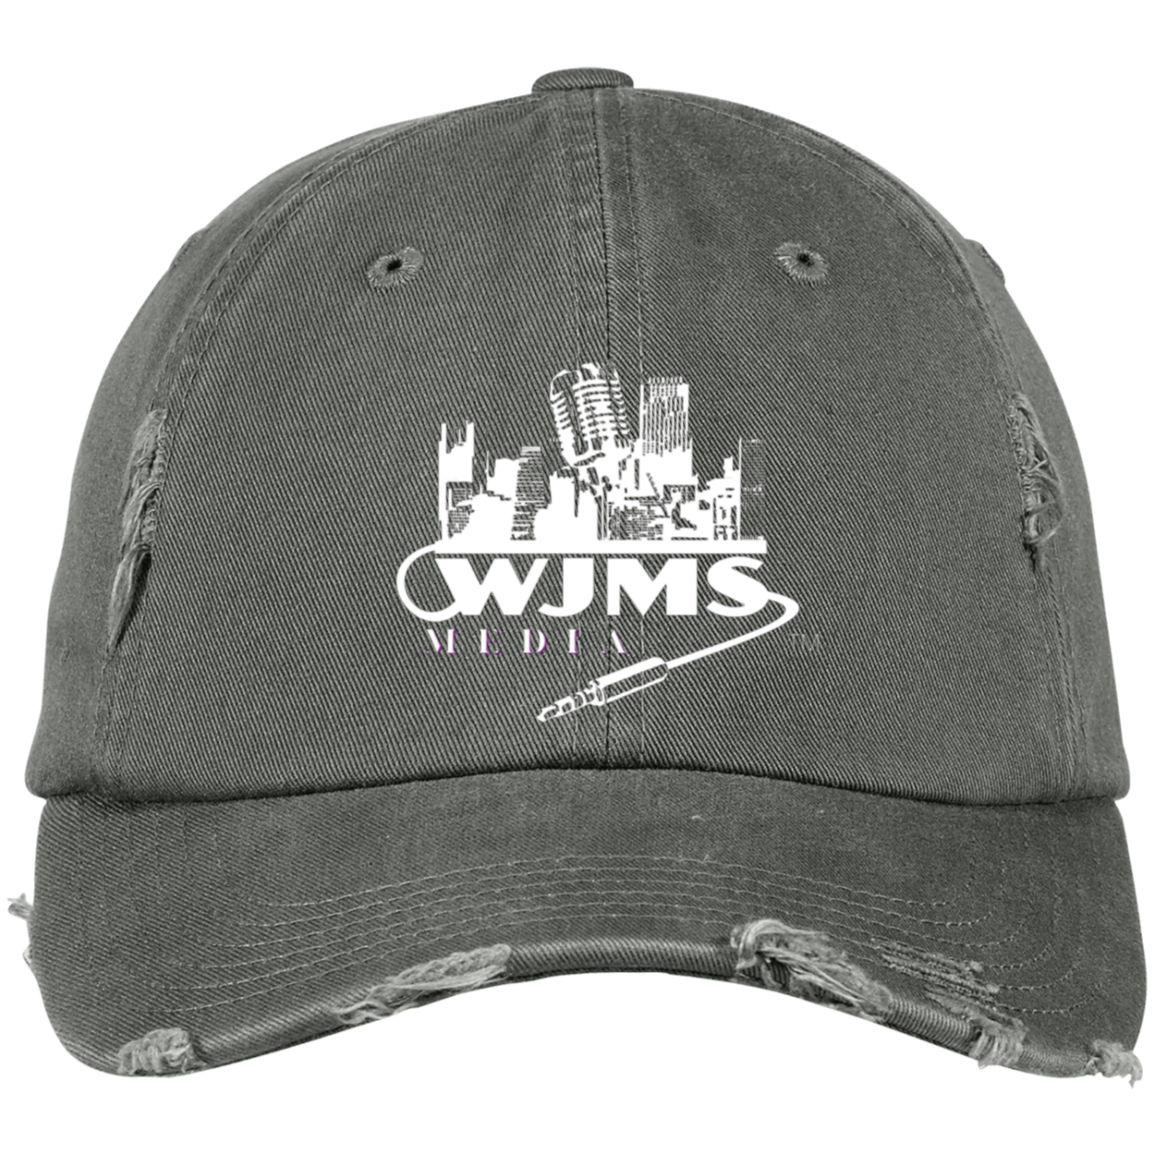 WJMS Embroidered Distressed Dad Cap